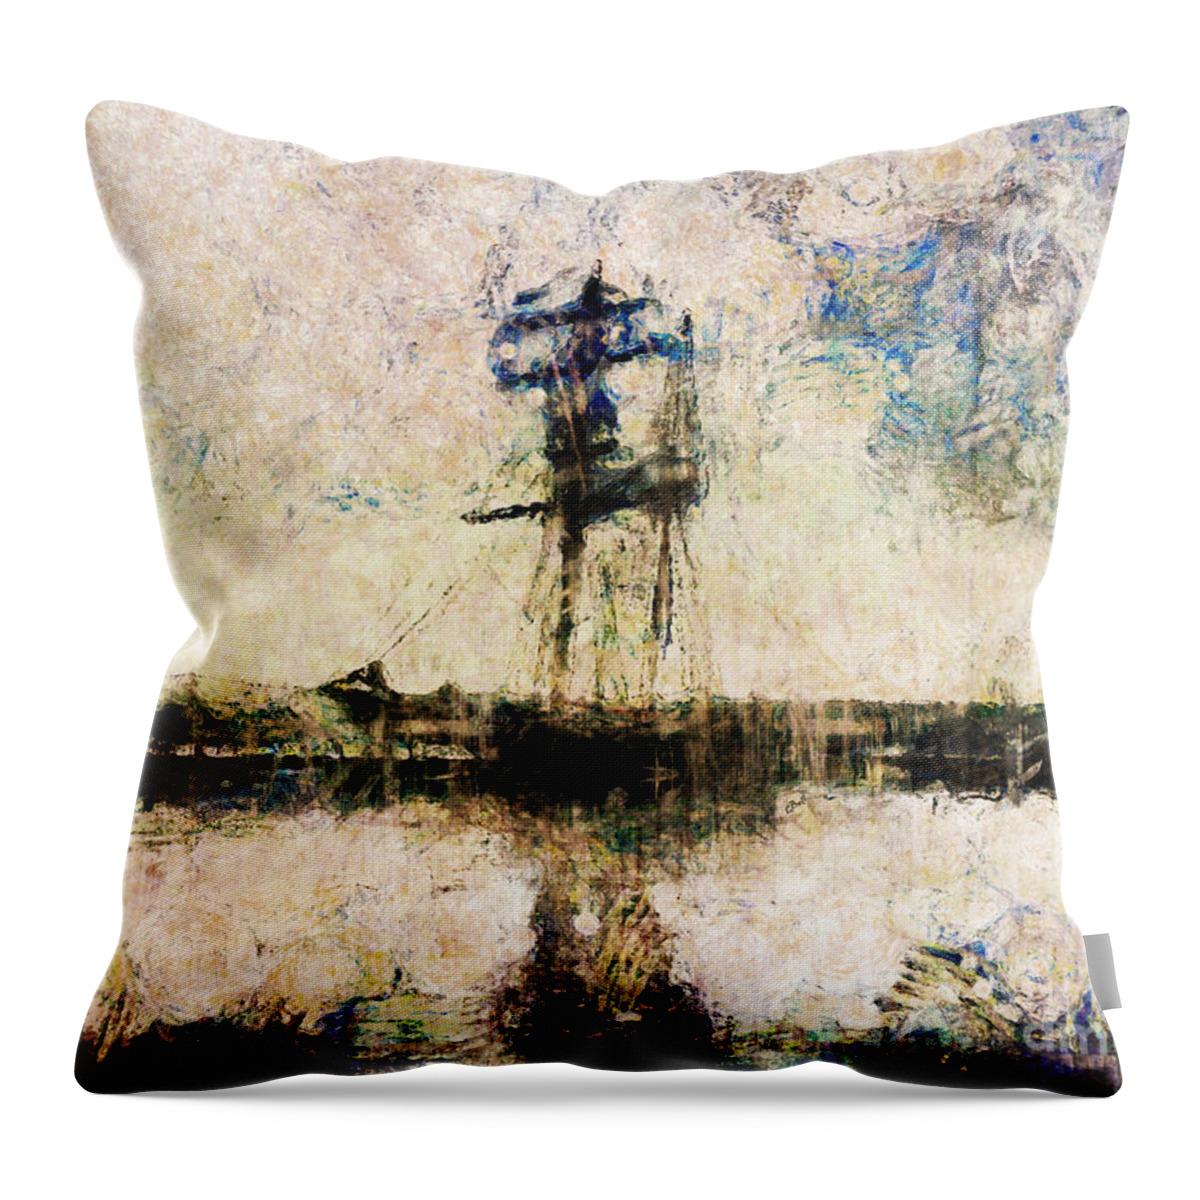 Ship Throw Pillow featuring the photograph A Gallant Ship by Claire Bull